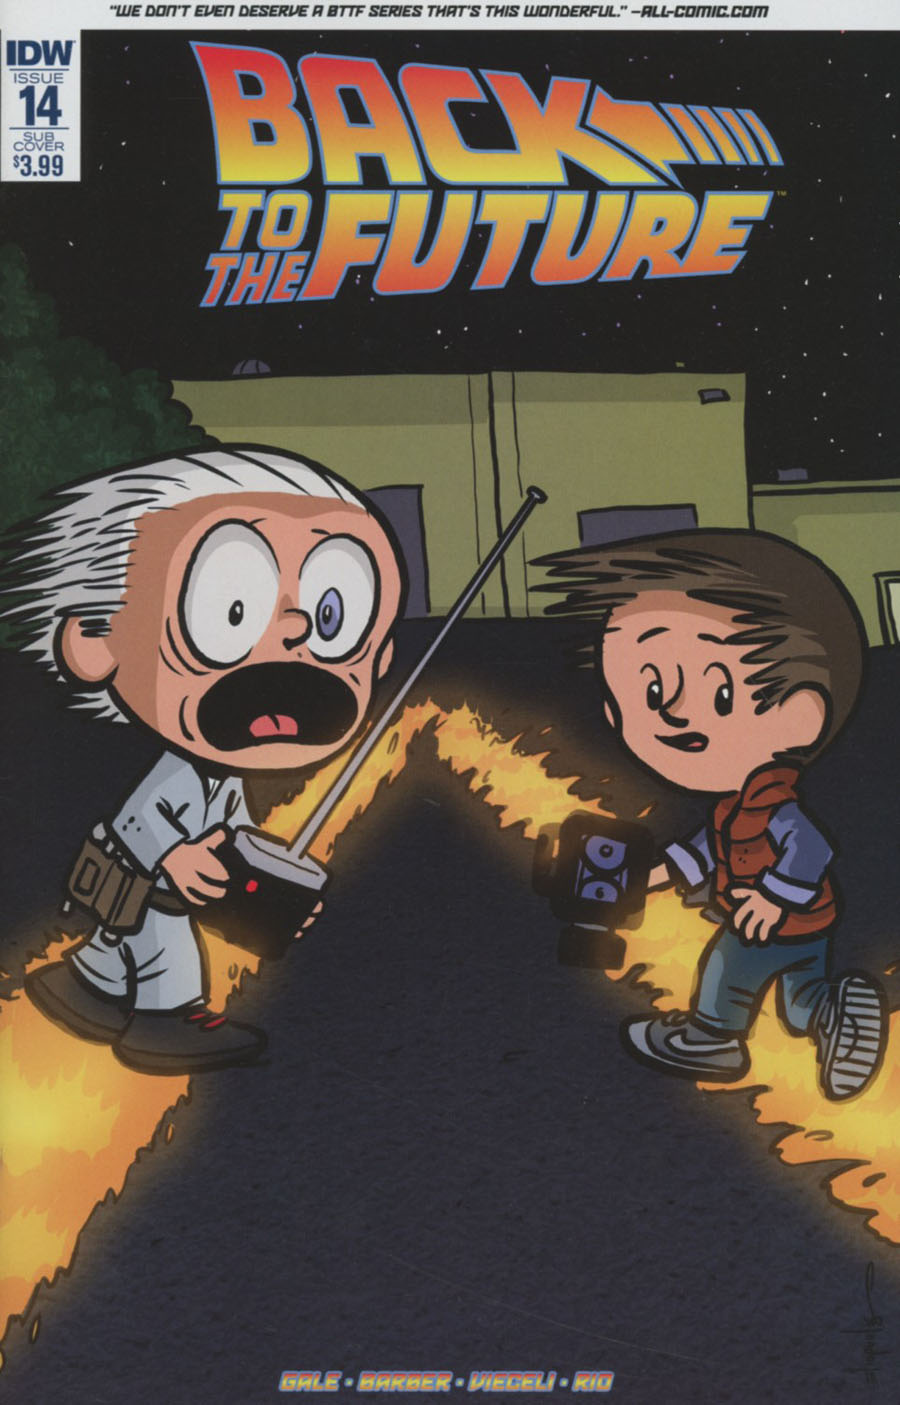 Back To The Future Vol 2 #14 Cover B Variant Chris Eliopoulos Subscription Cover